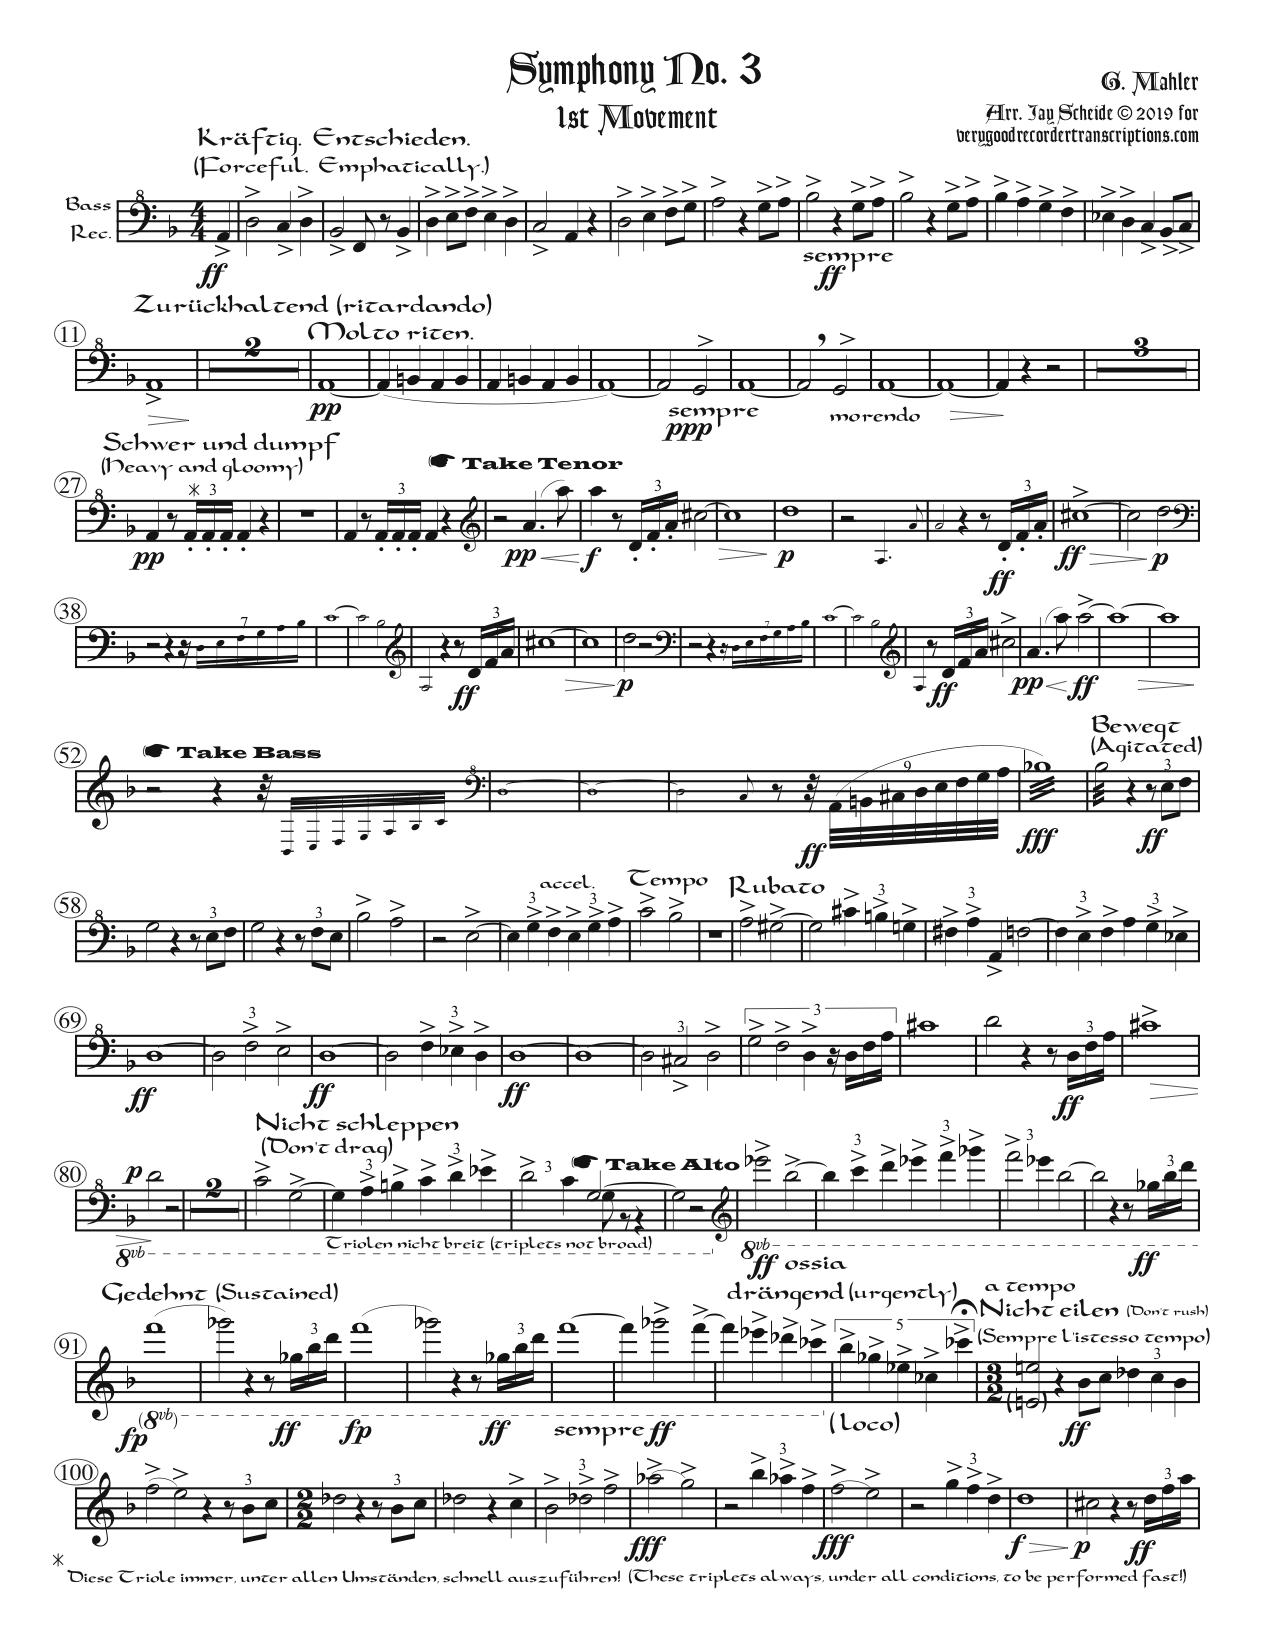 First three Mvts. from Symphony No. 3, arr. for one player alternating between Sopranino, Soprano at old & modern pitch, Alto at old & modern pitch, and in G, Tenor & Bass